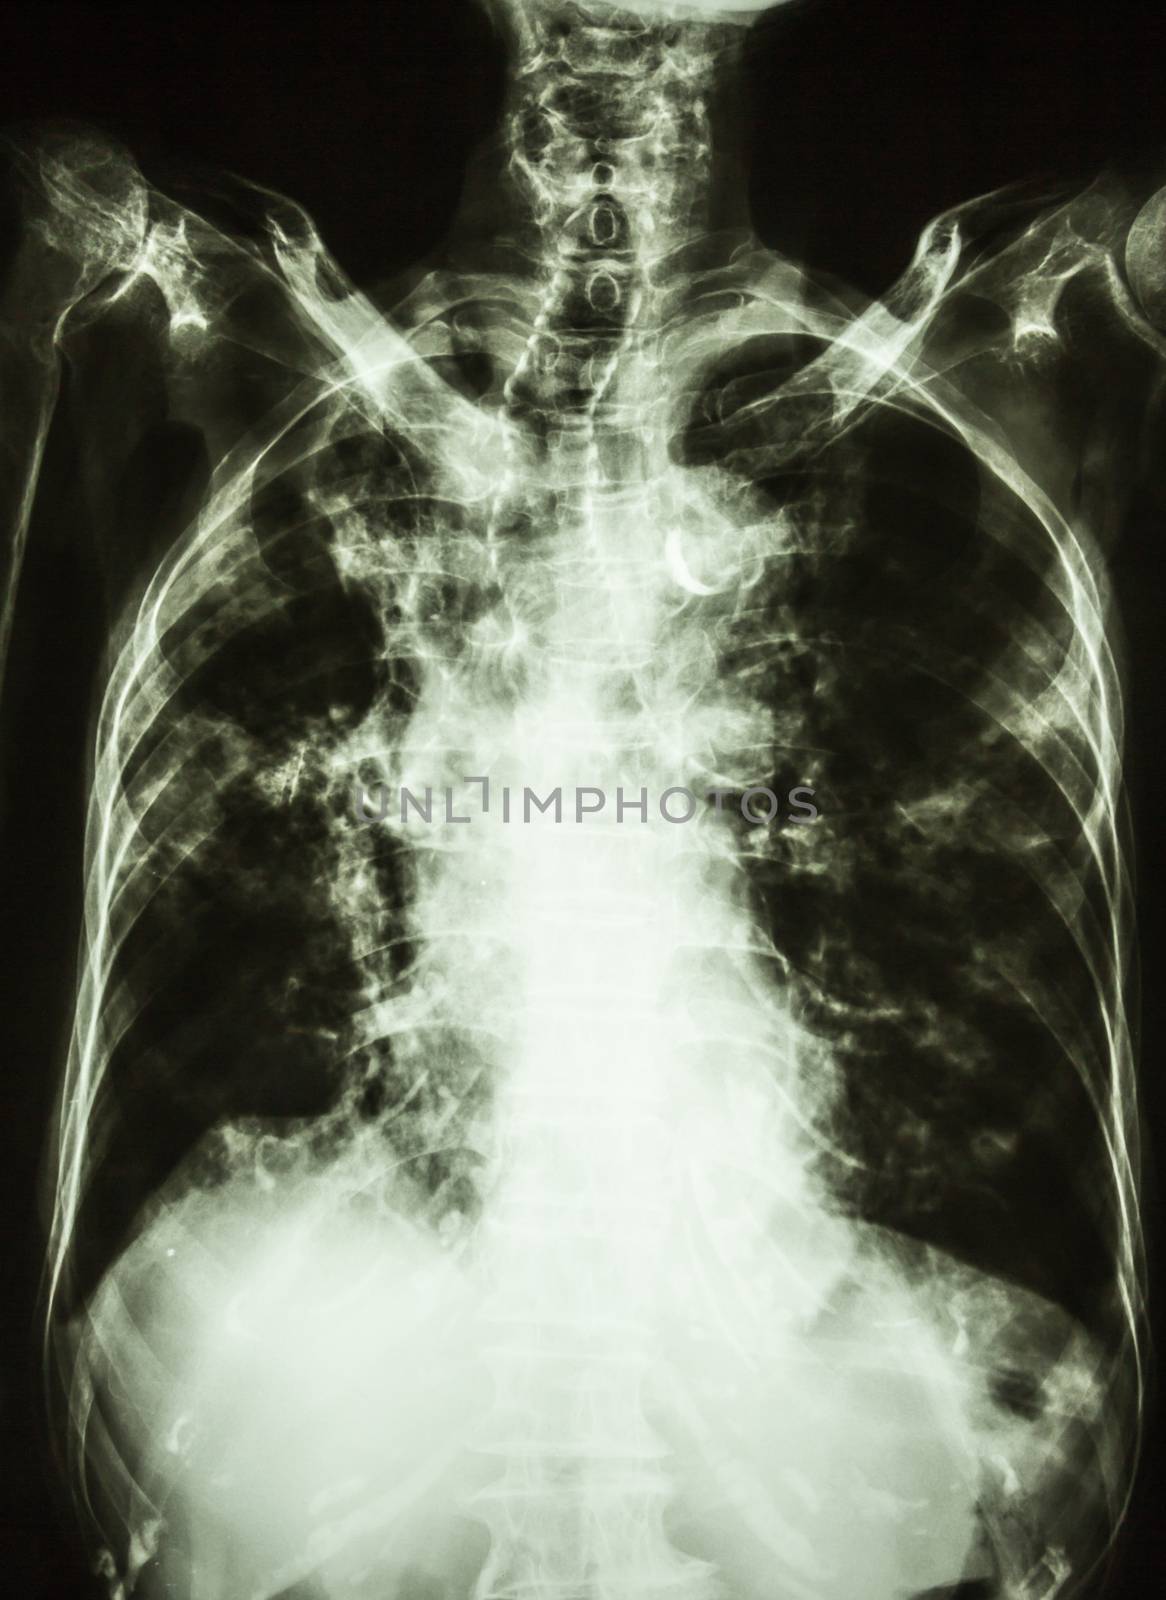 film chest X-ray PA upright of old patient : show interstitial infiltration both lung and calcification at trachea(can seen shape of trachea) due to mycobacterium tuberculosis infection (Pulmonary tuberculosis)